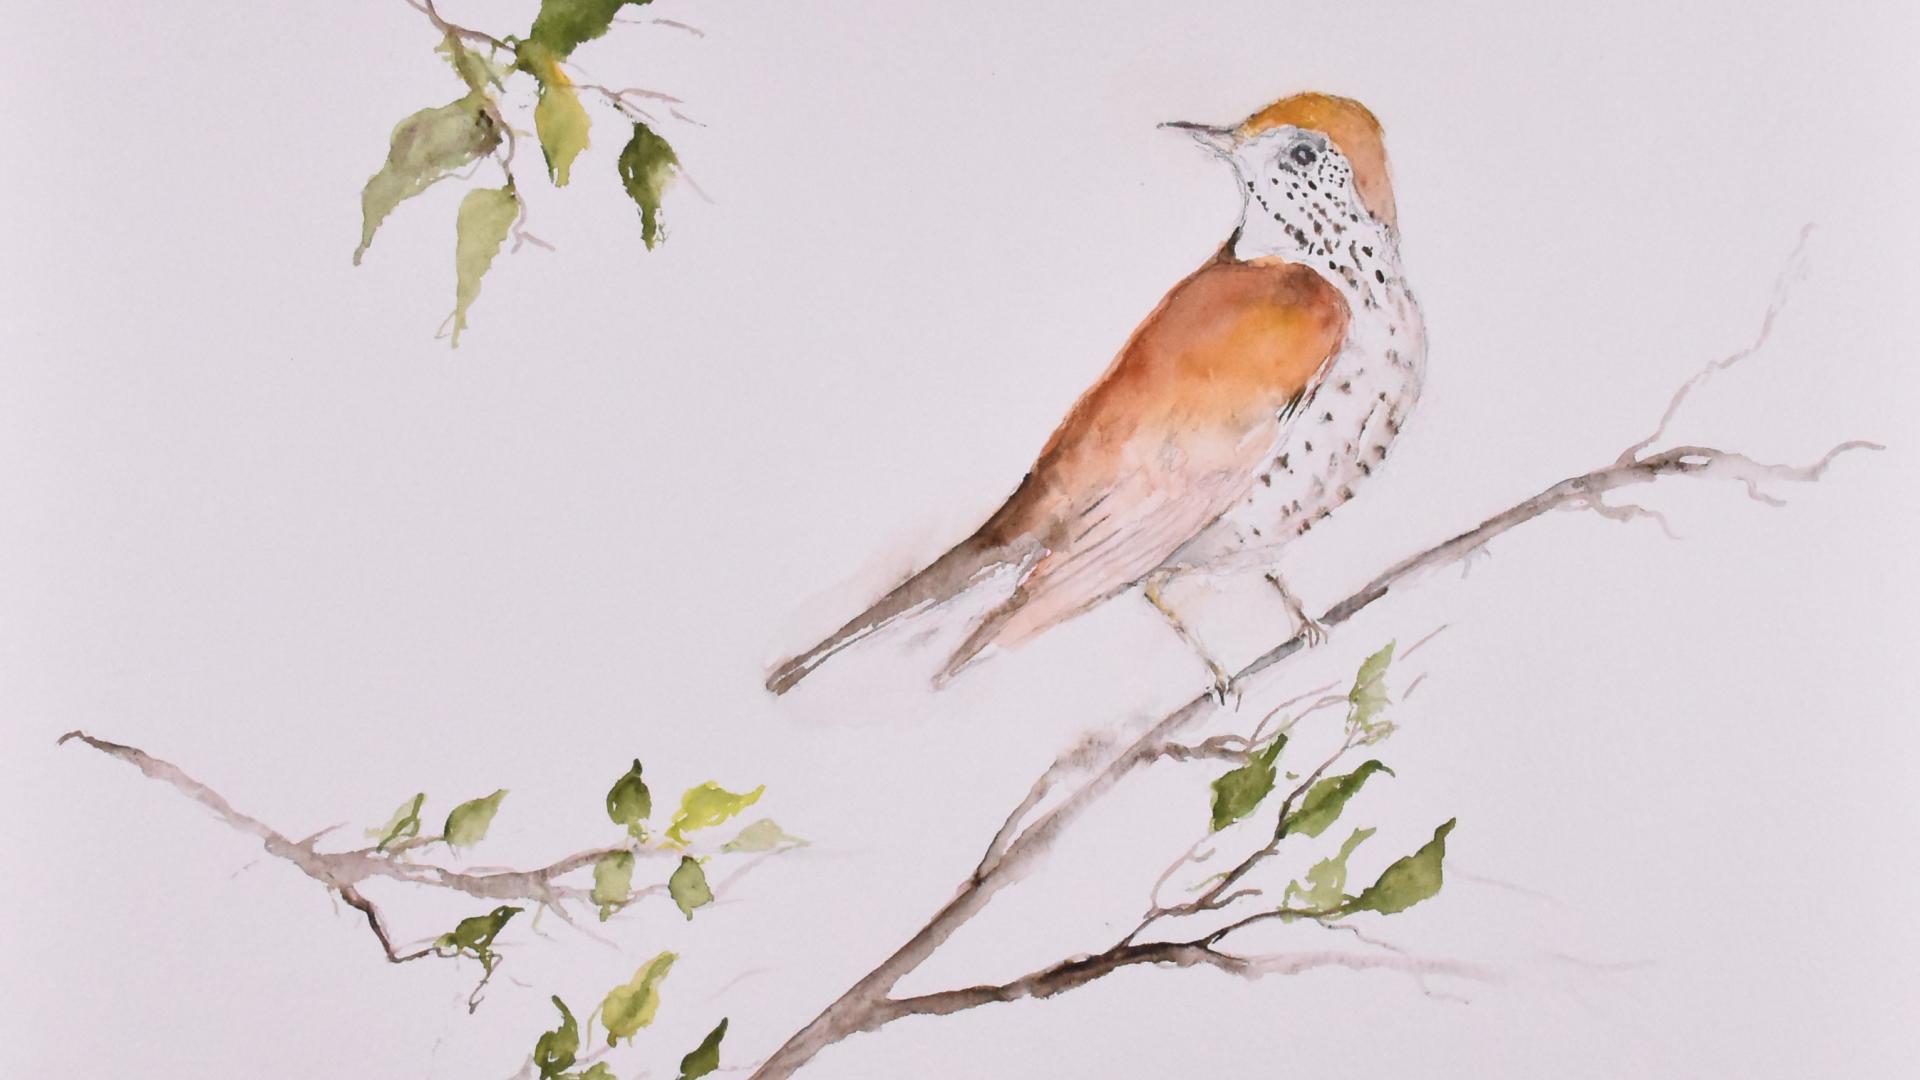 Watercolor painting of a wood thrush sitting on a branch with green leaves against a white background.